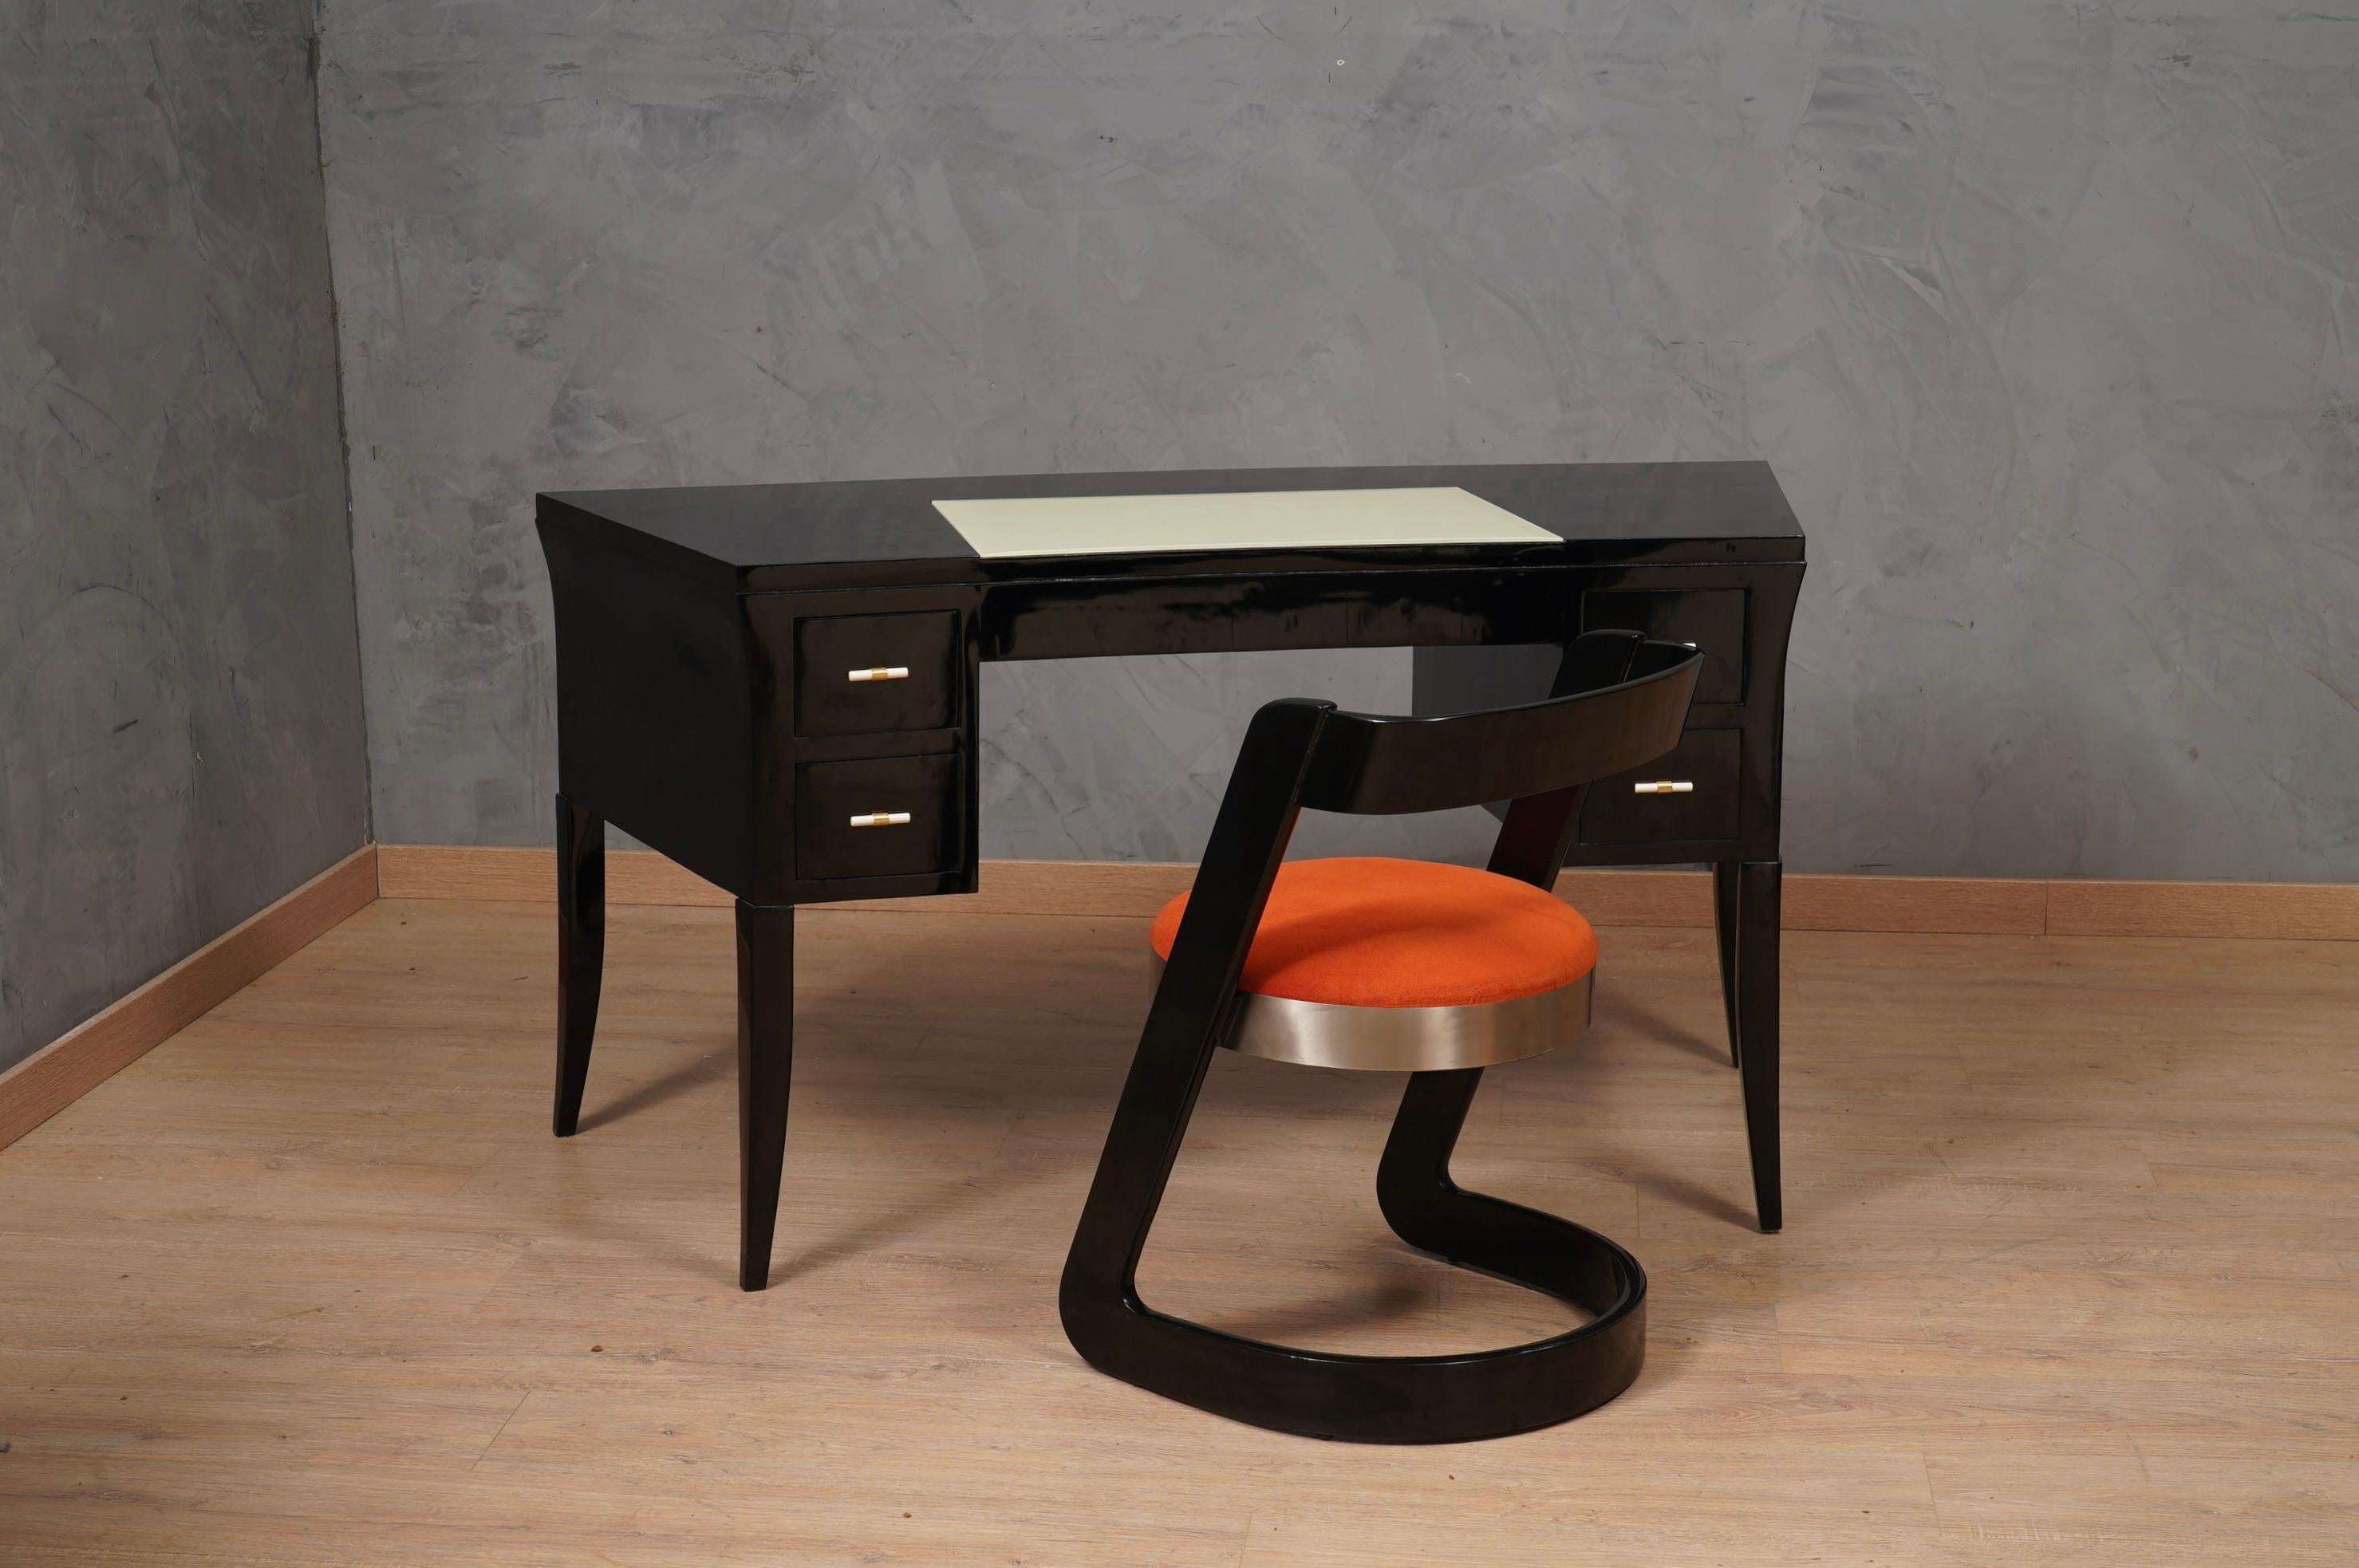 Elegant and refined desk in black lacquer and glass. Particular its design which provides for a slight curvature.

The writing desk is in lacquered wood in black shellac, the lacquering is well polished. The shape is not rectangular, the long sides